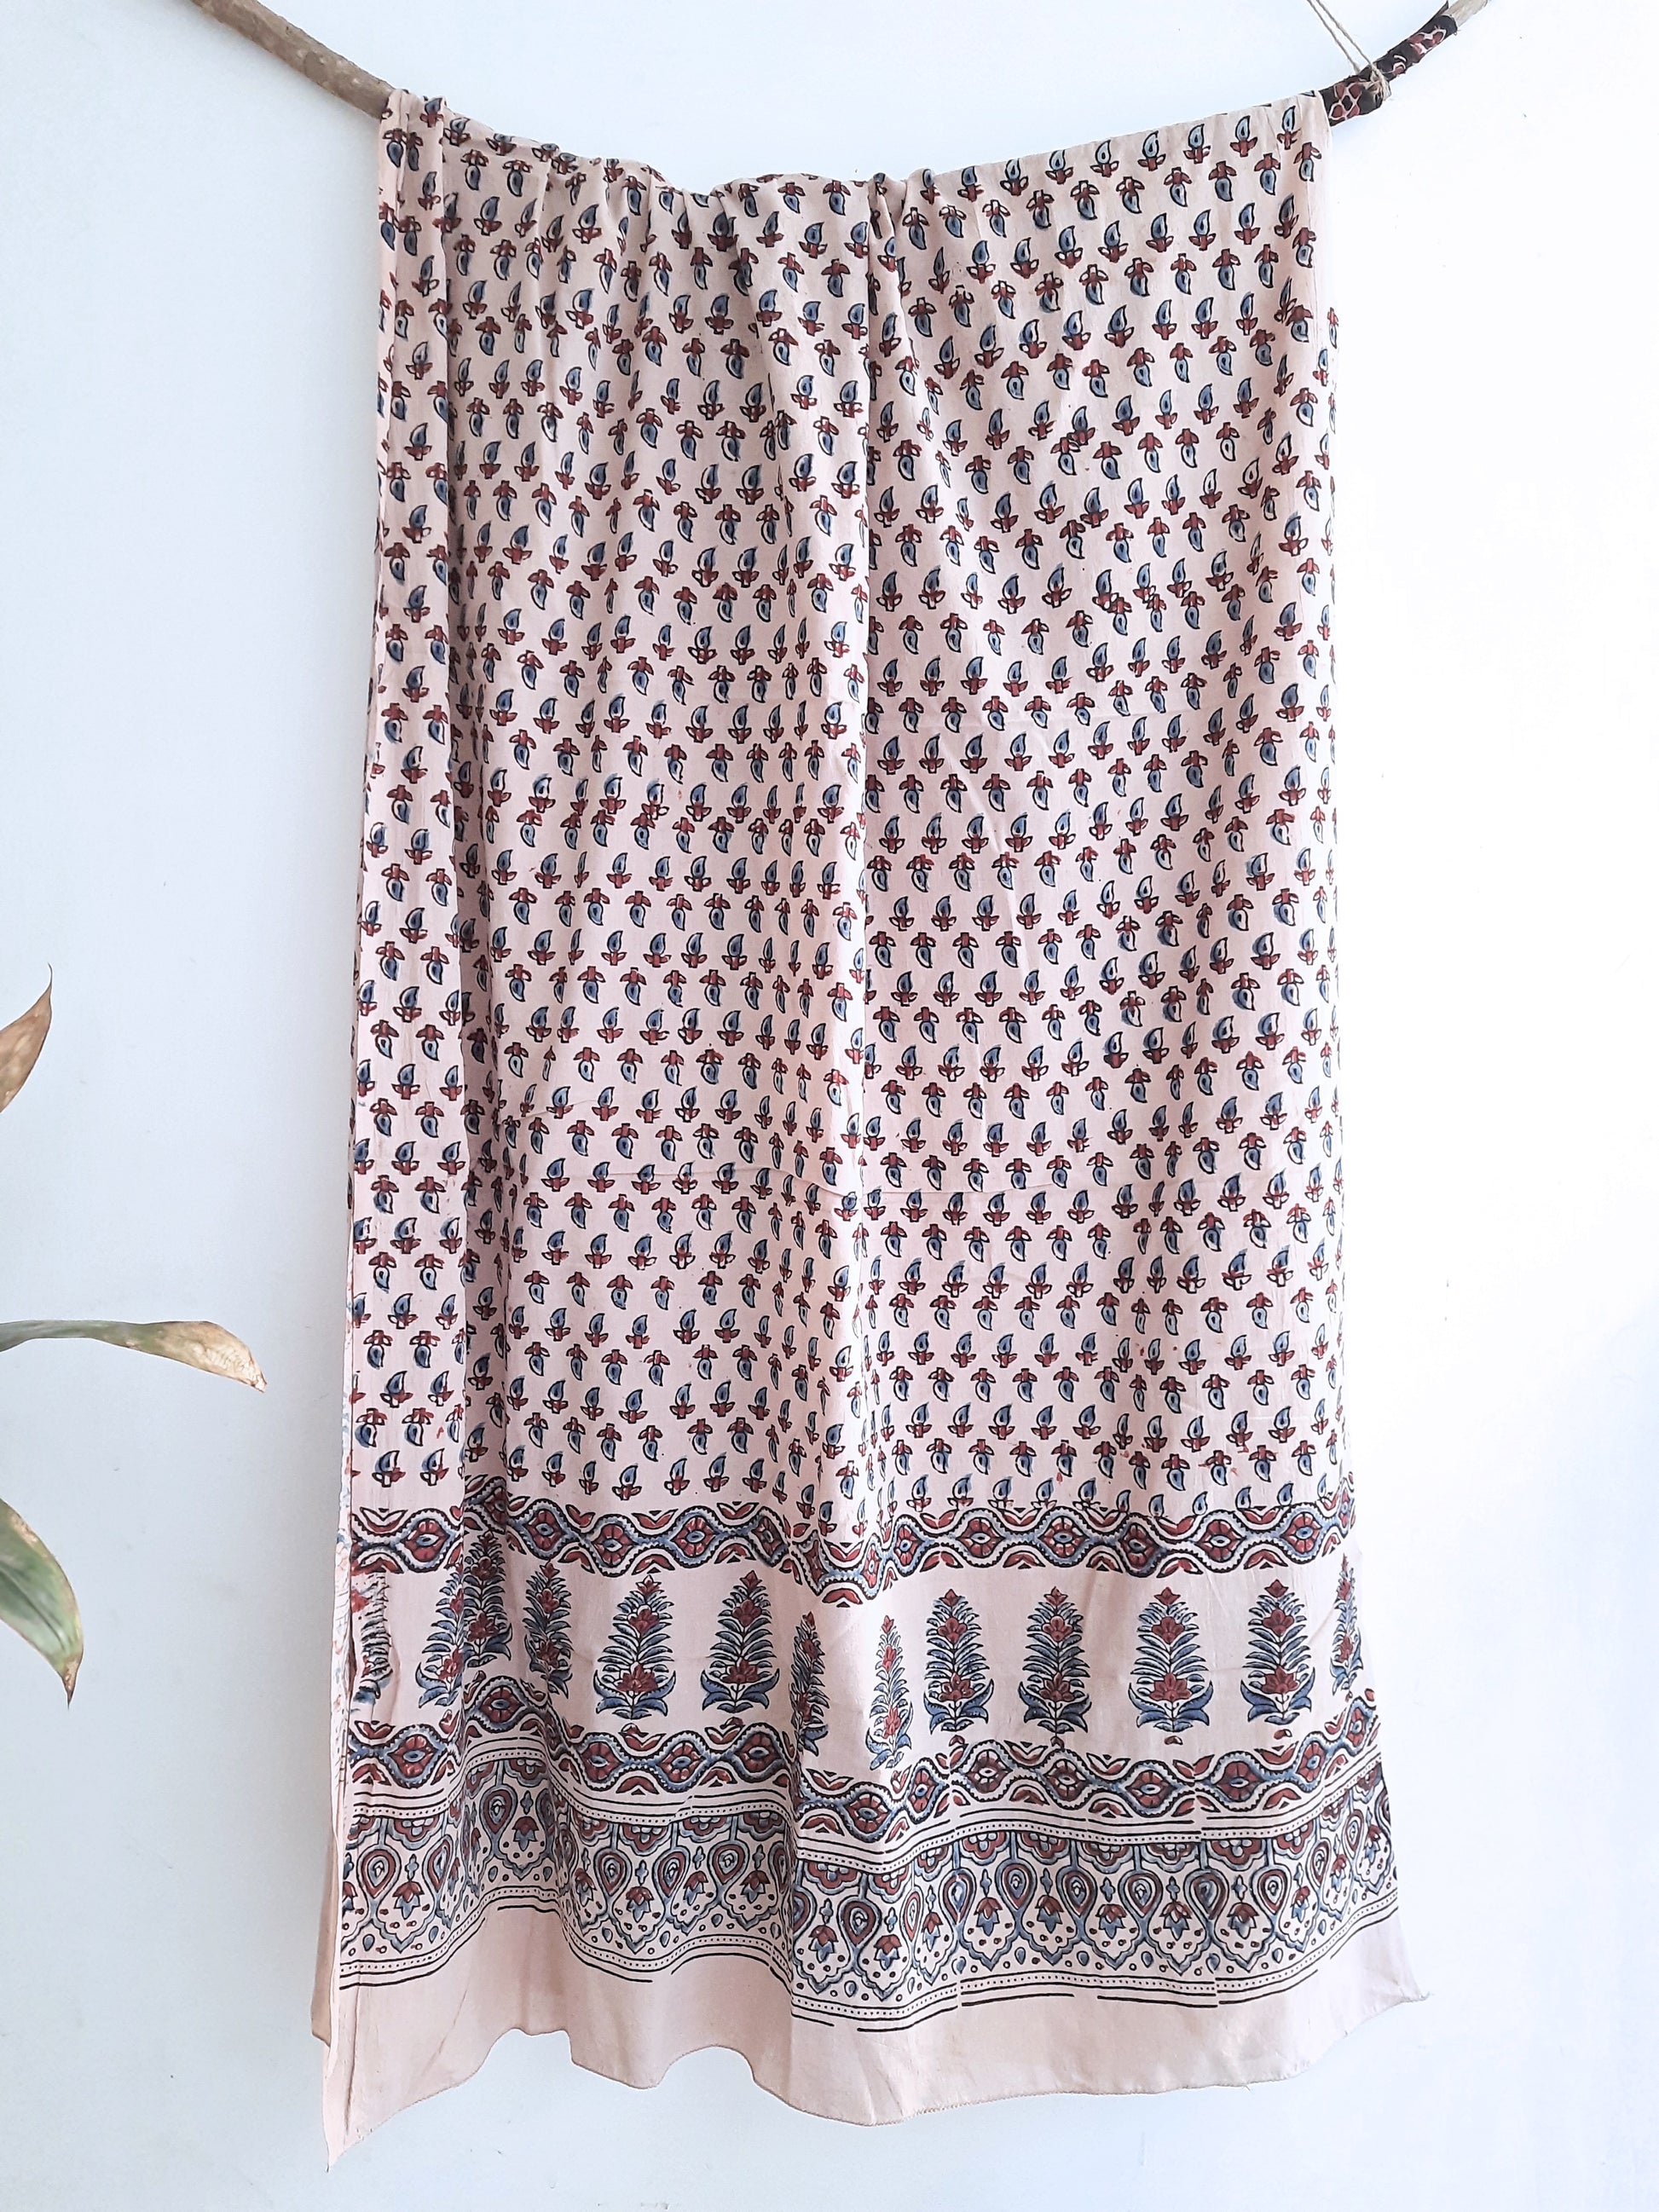 Myrobalan Dyed Boota Cotton Dupatta from Turquoisethestore: Pure cotton, hand block printed with ajrakh techniques. A sustainable and stylish addition to your wardrobe, perfect for elevating your summer style. Embrace artisanal charm and timeless elegance. Shop now!